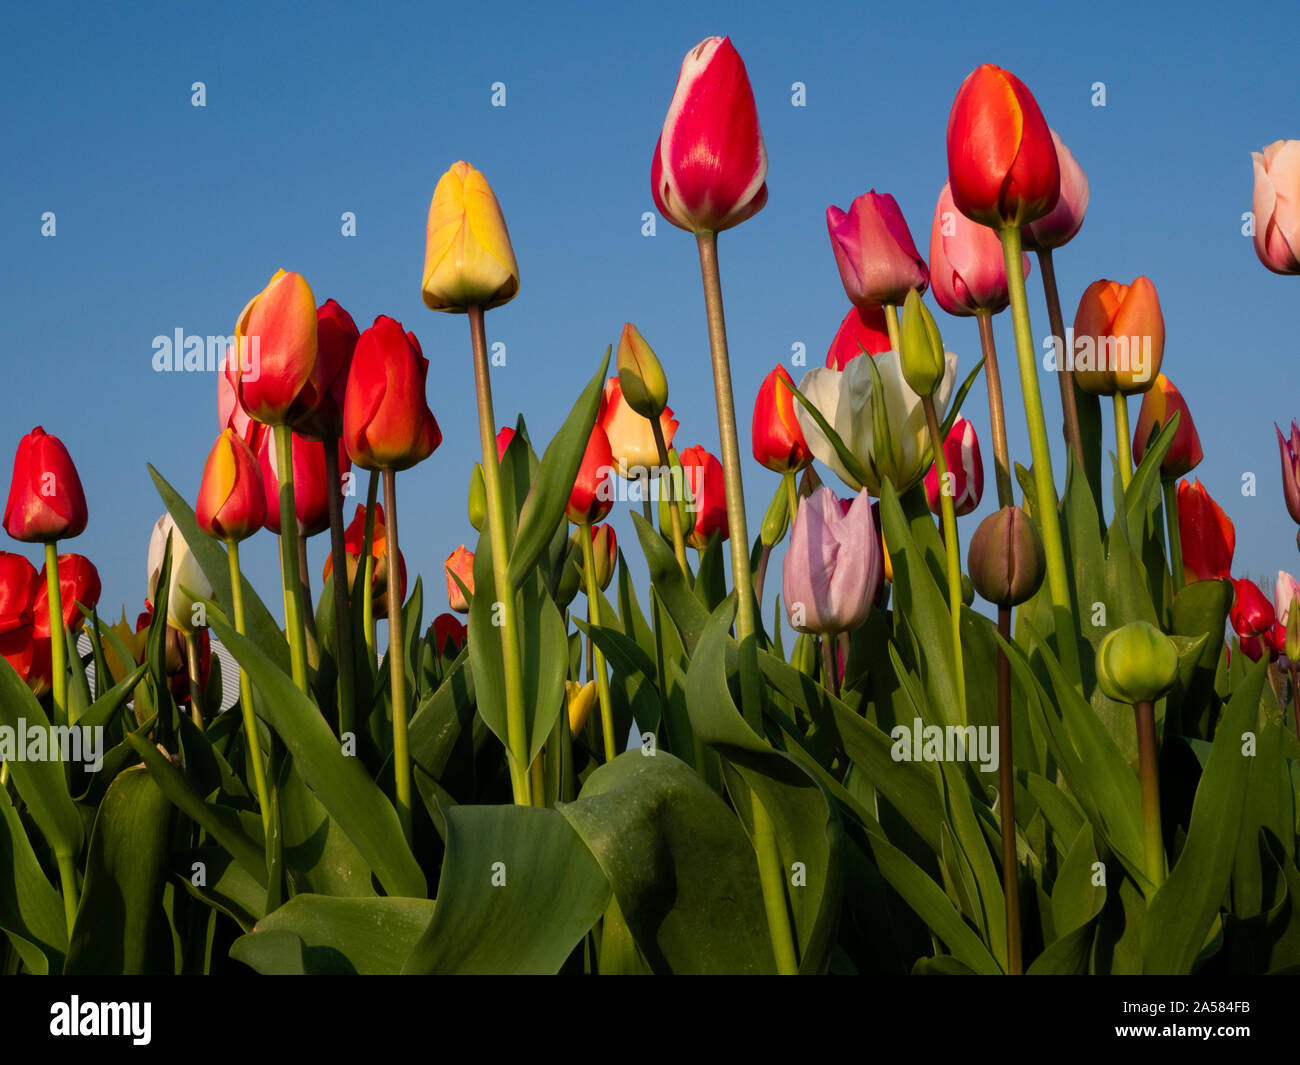 Close-up of colorful tulips, Burgerbrug, North Holland, Netherlands Stock Photo